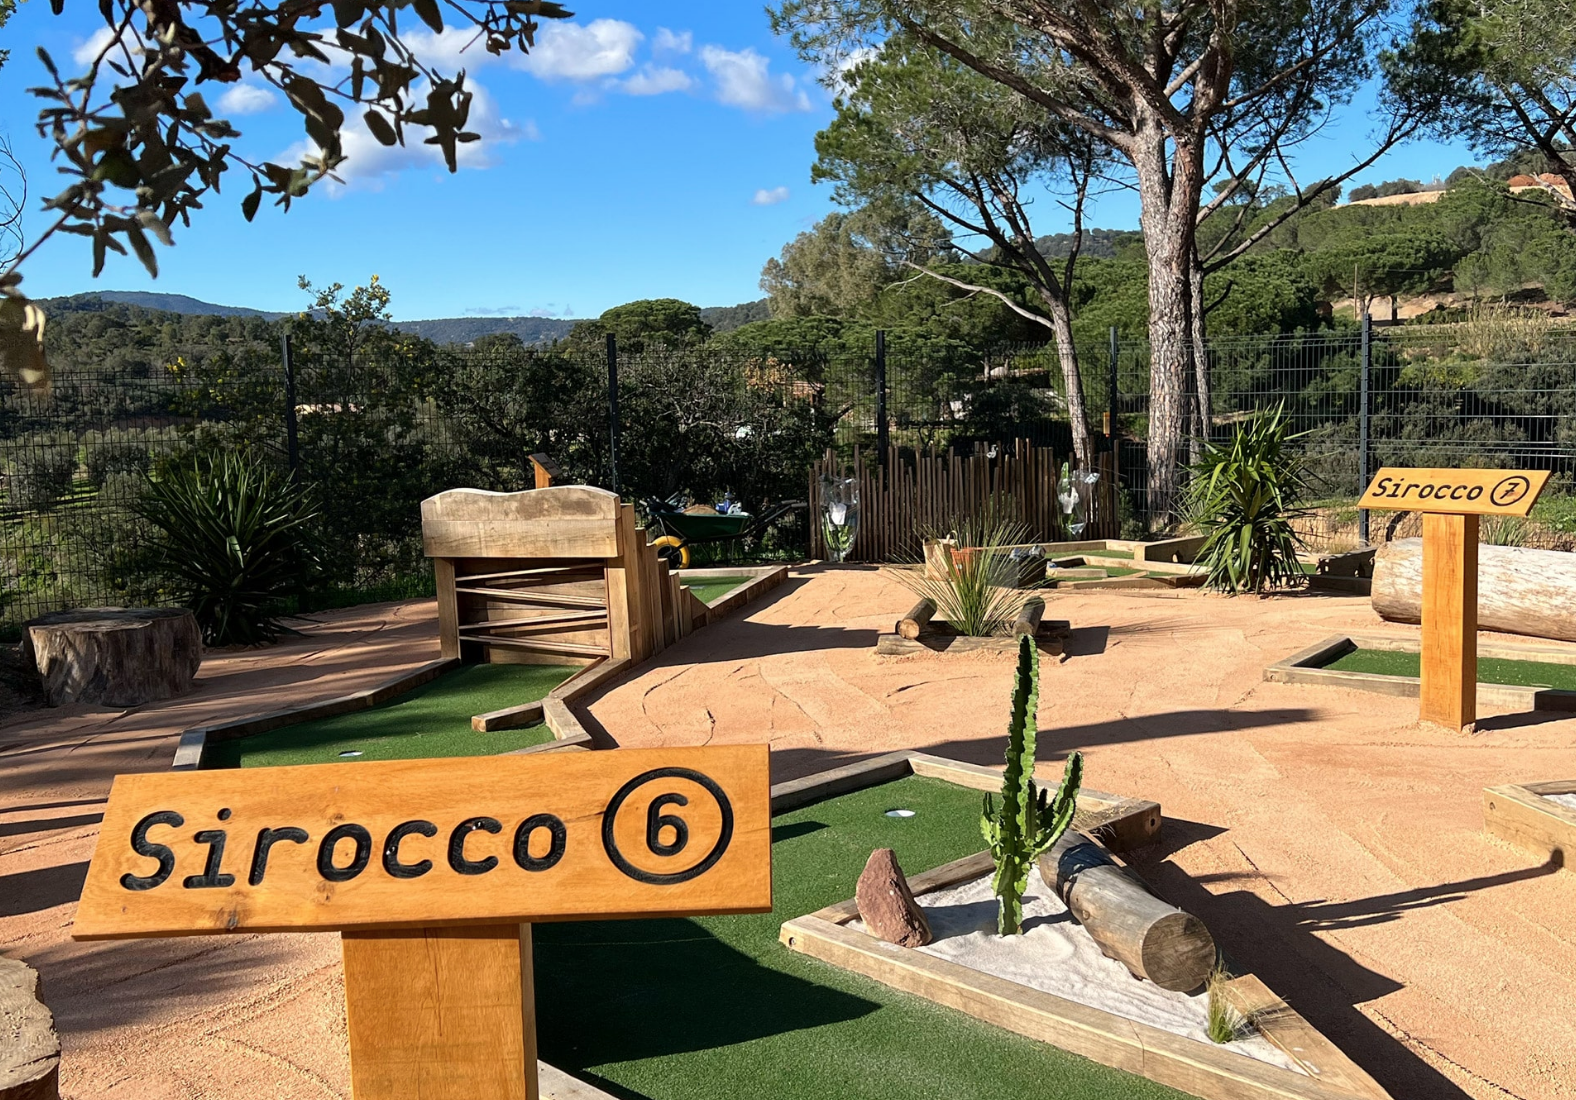 The Sirocco Course